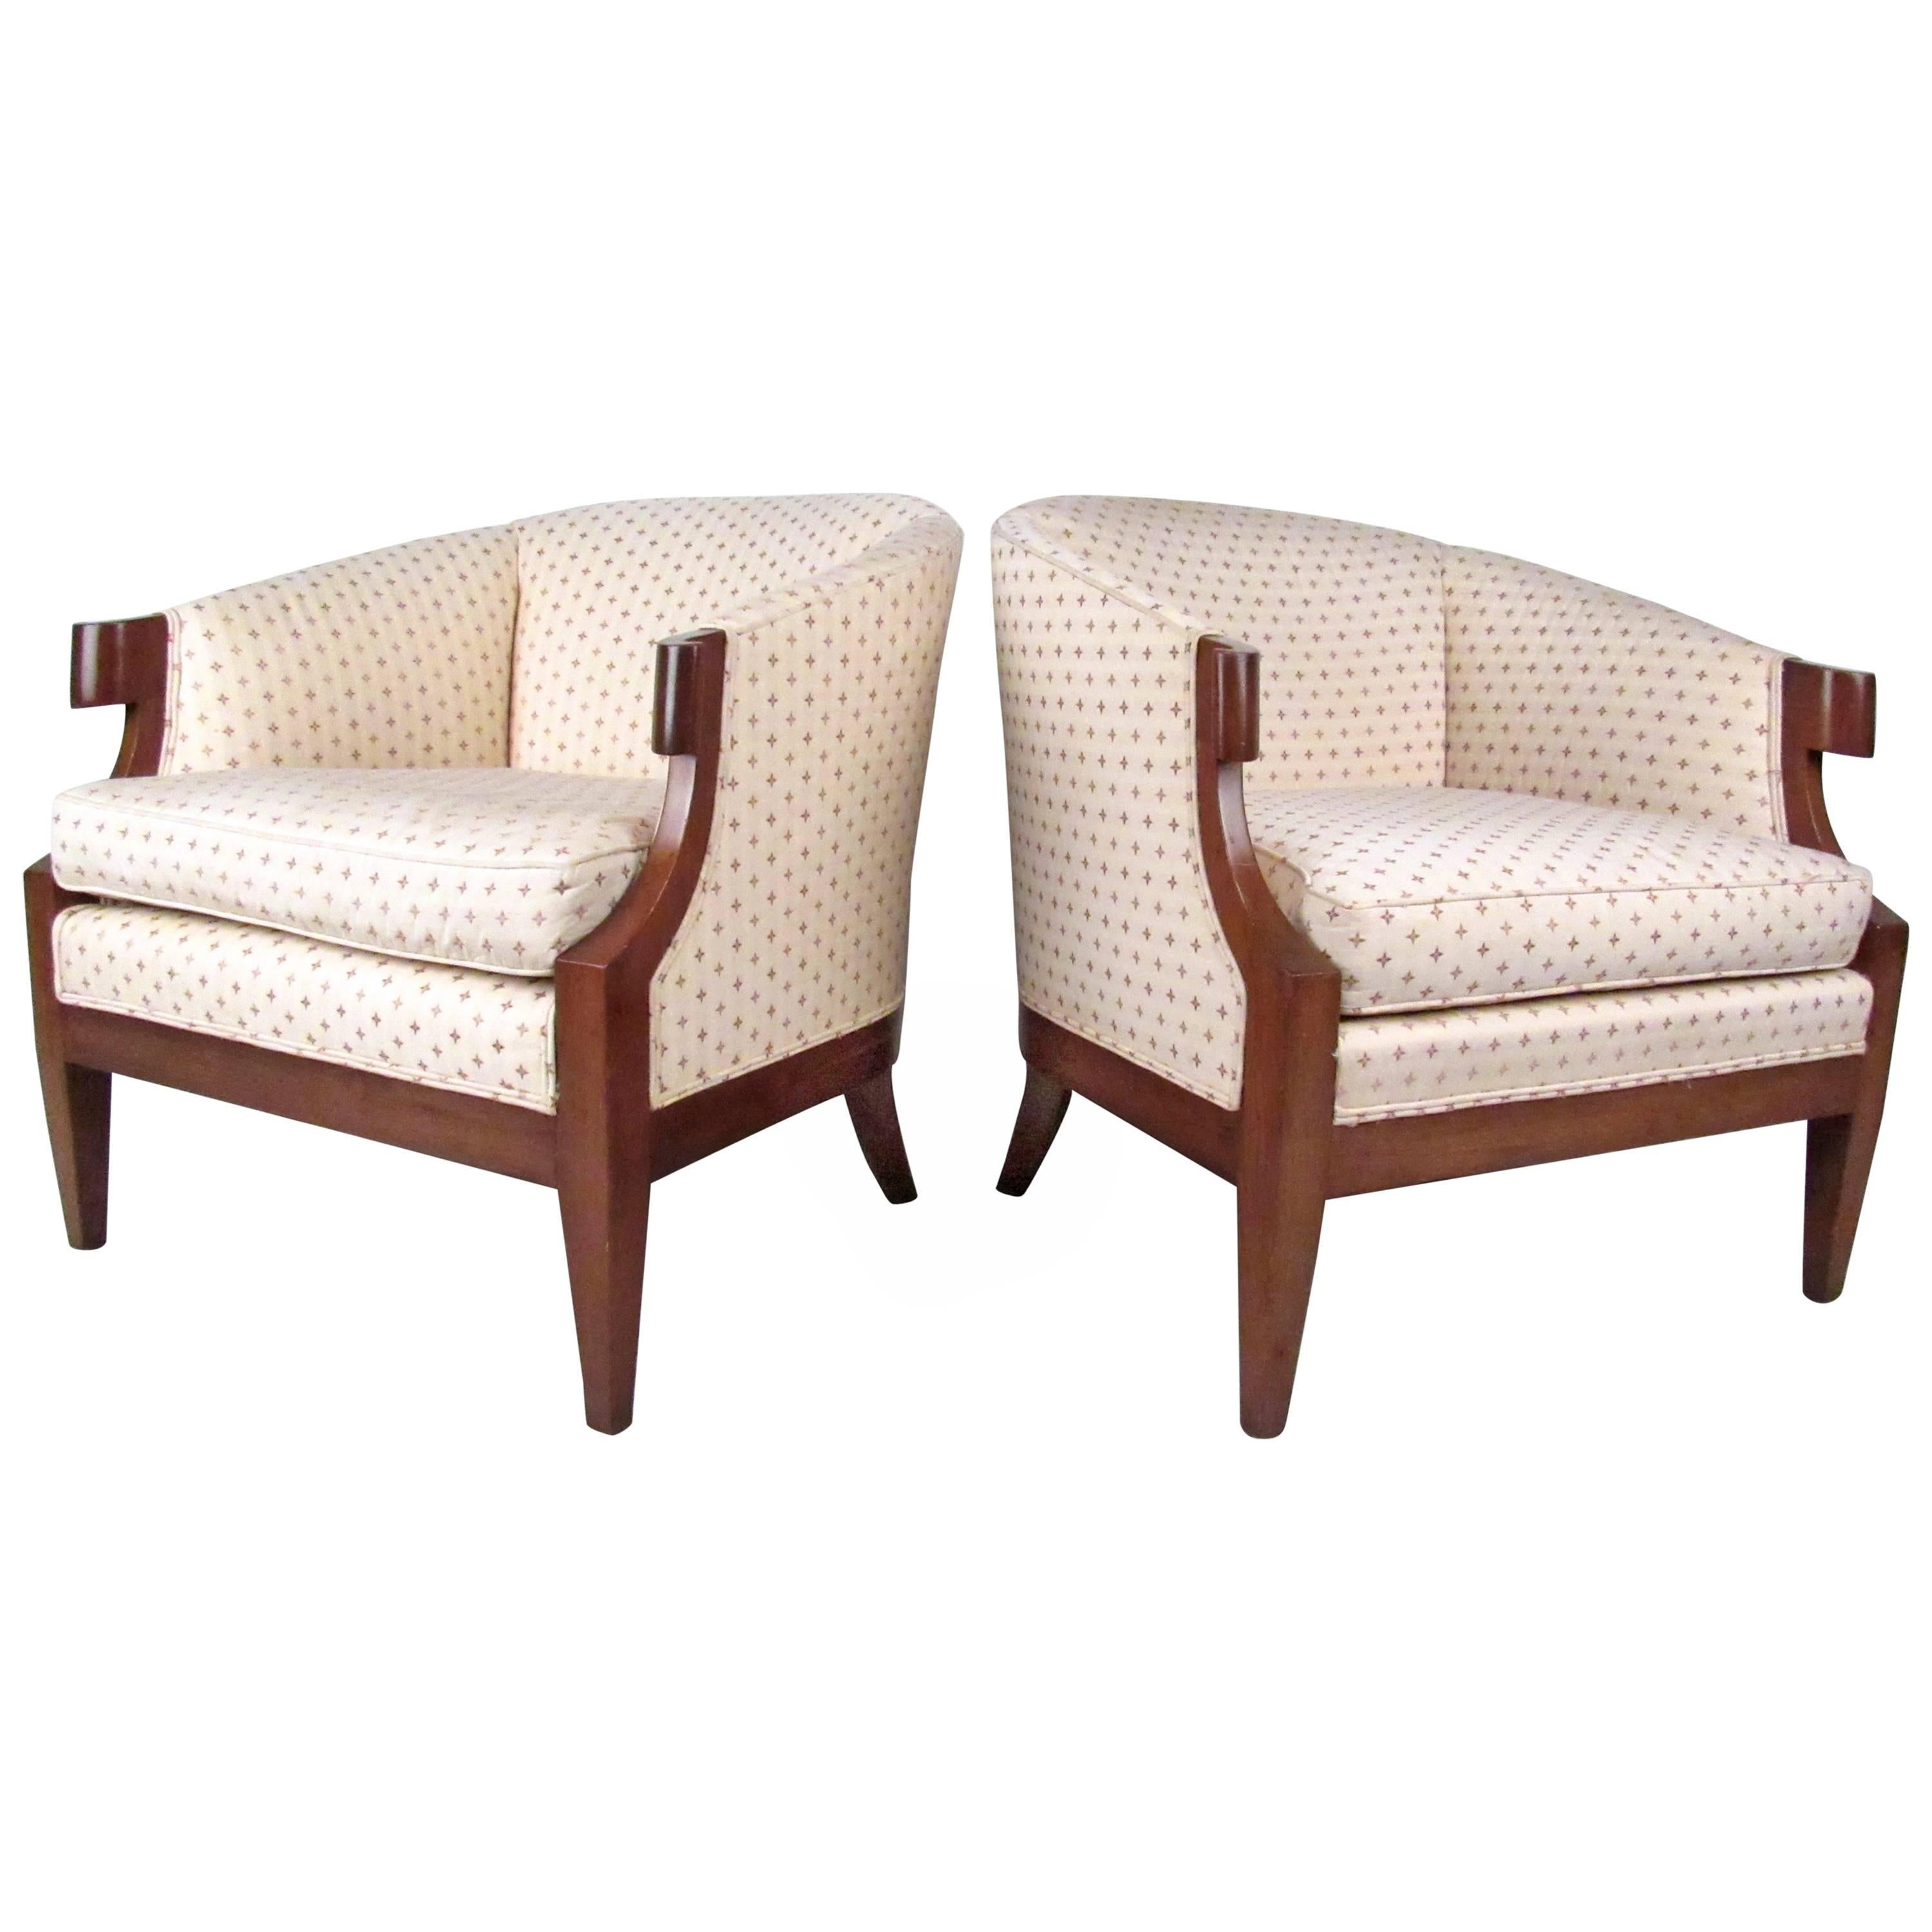 Pair of Vintage Decorator Style Armchairs